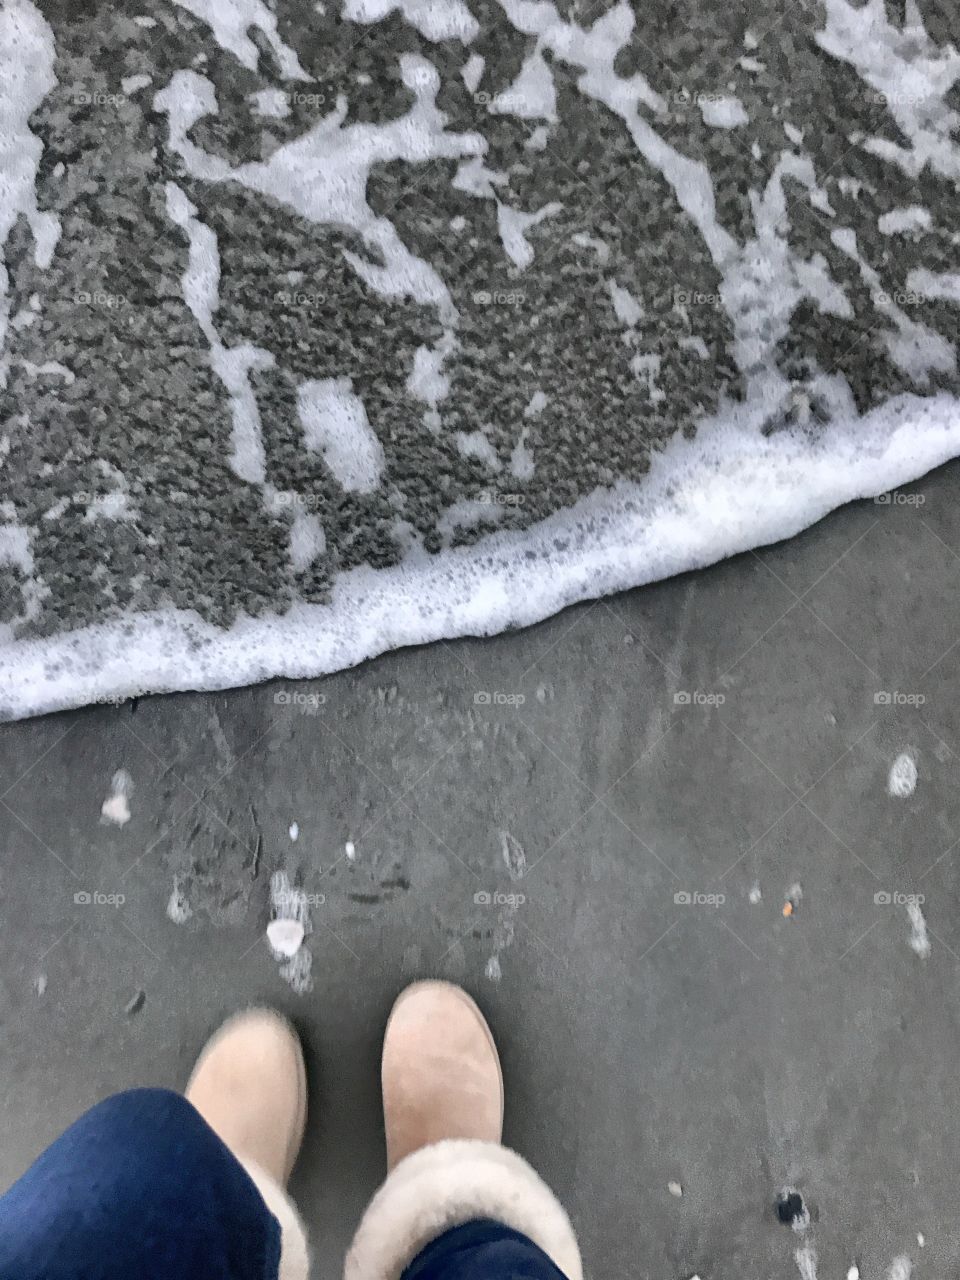 When the waves greet your feet